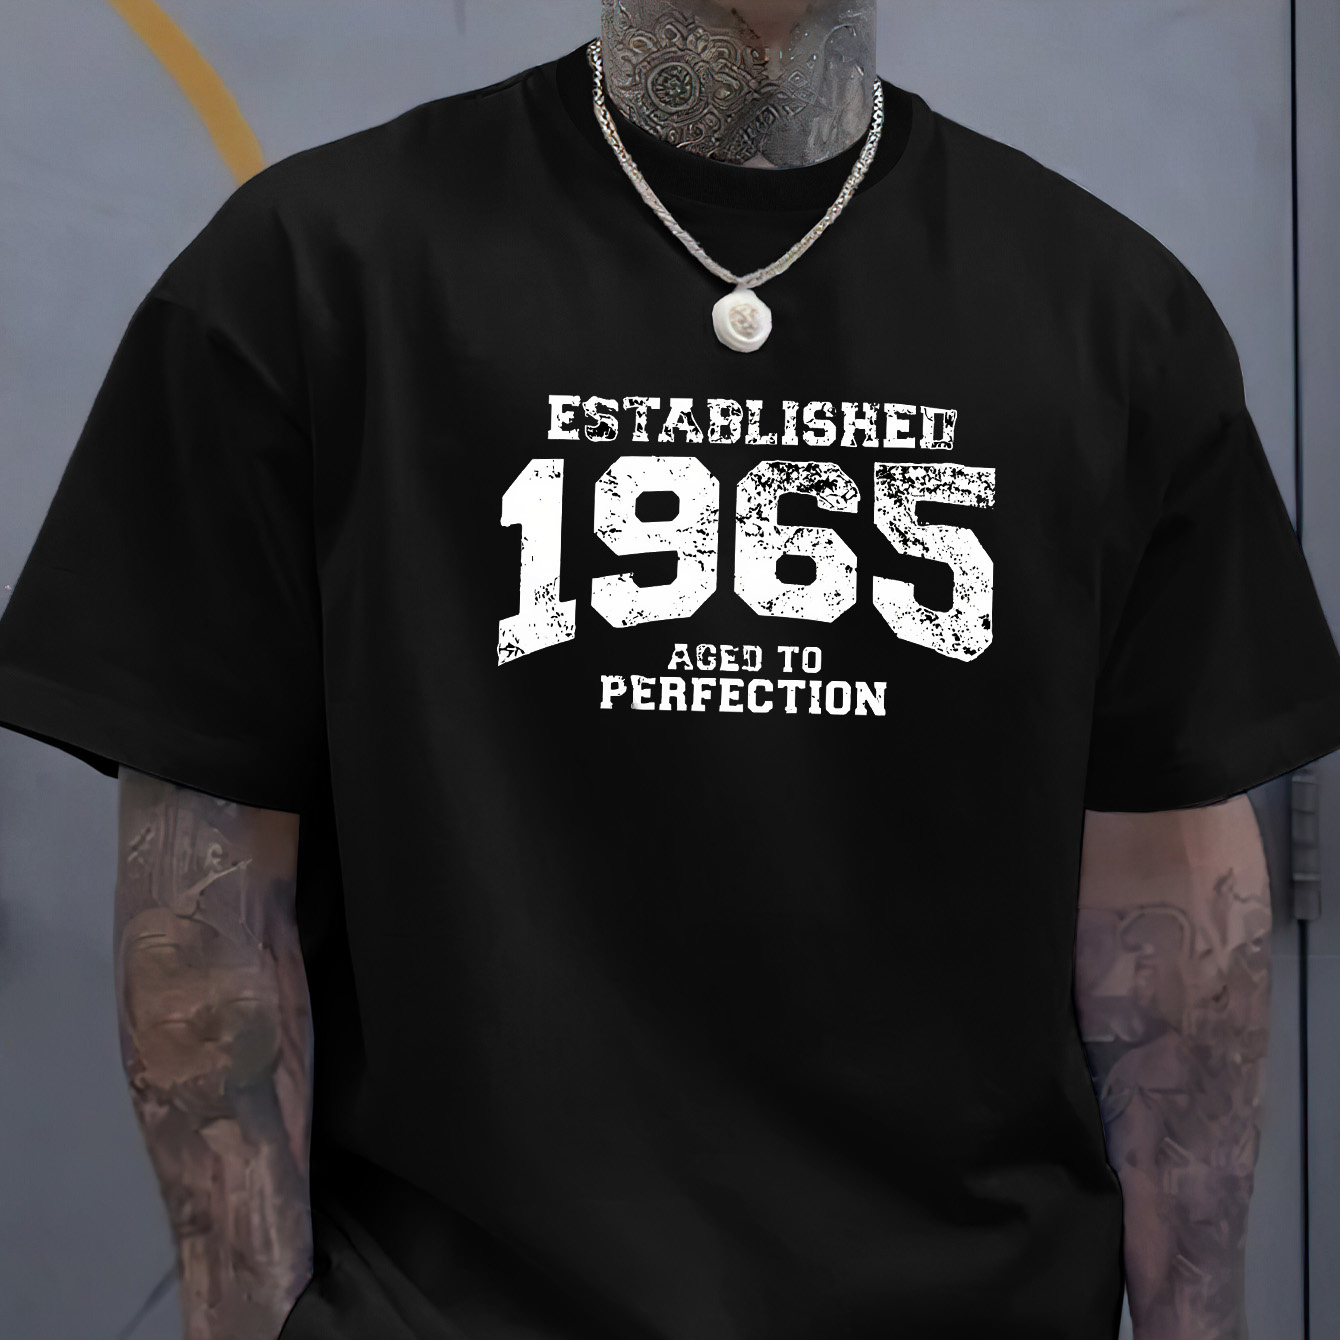 

1965 Aged To Perfection" Trendy Print Casual Short-sleeved T-shirt For Men, Spring And Summer Top, Comfortable Round Neck Tee, Regular Fit, Versatile Fashion For Everyday Wear